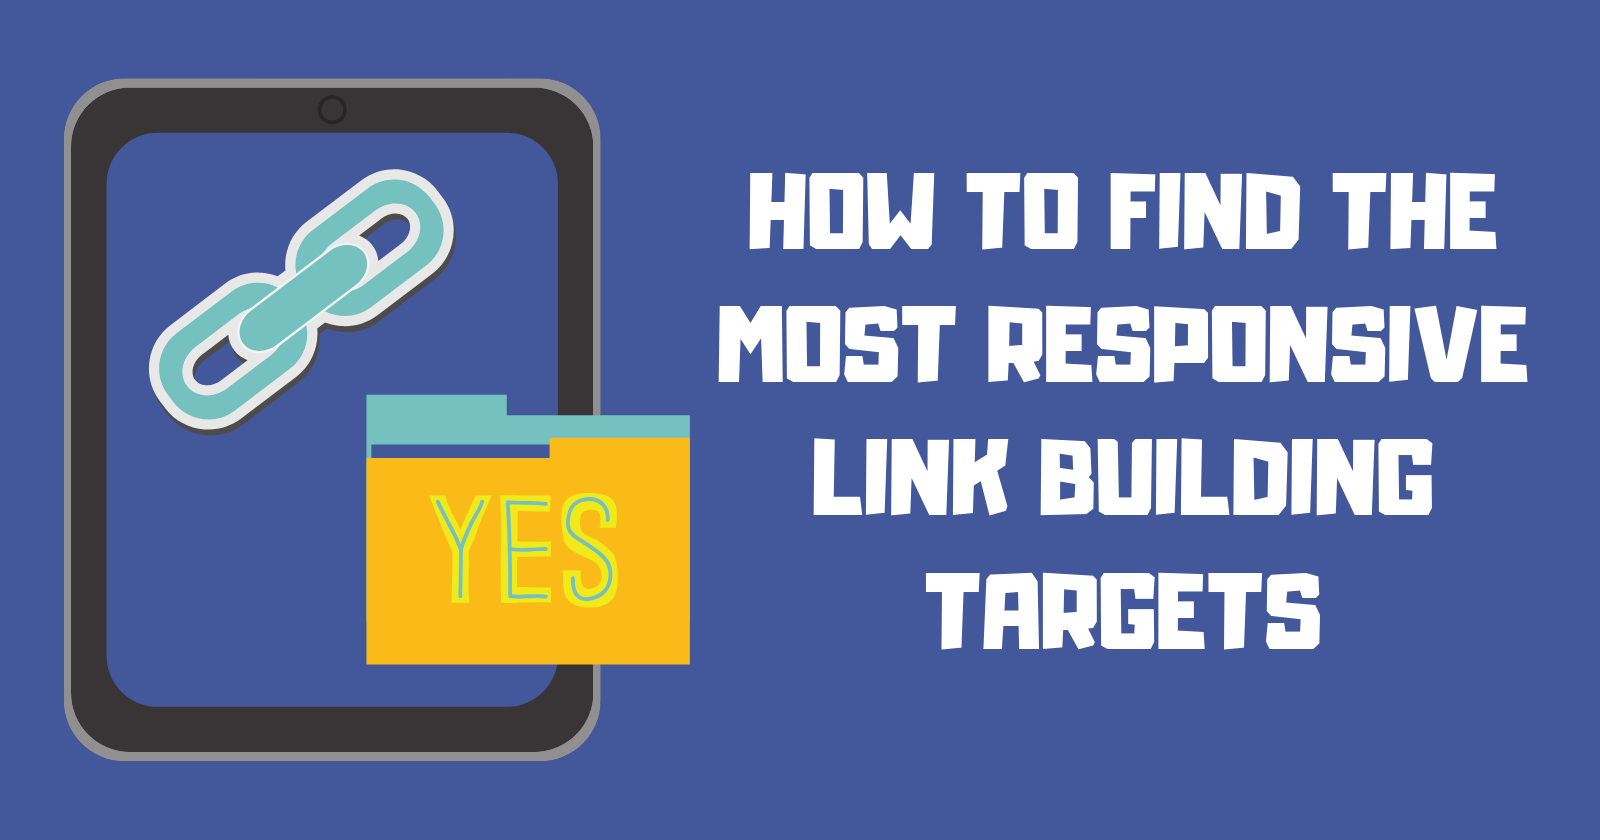 How Long Does It Take To See Results From Link Building?